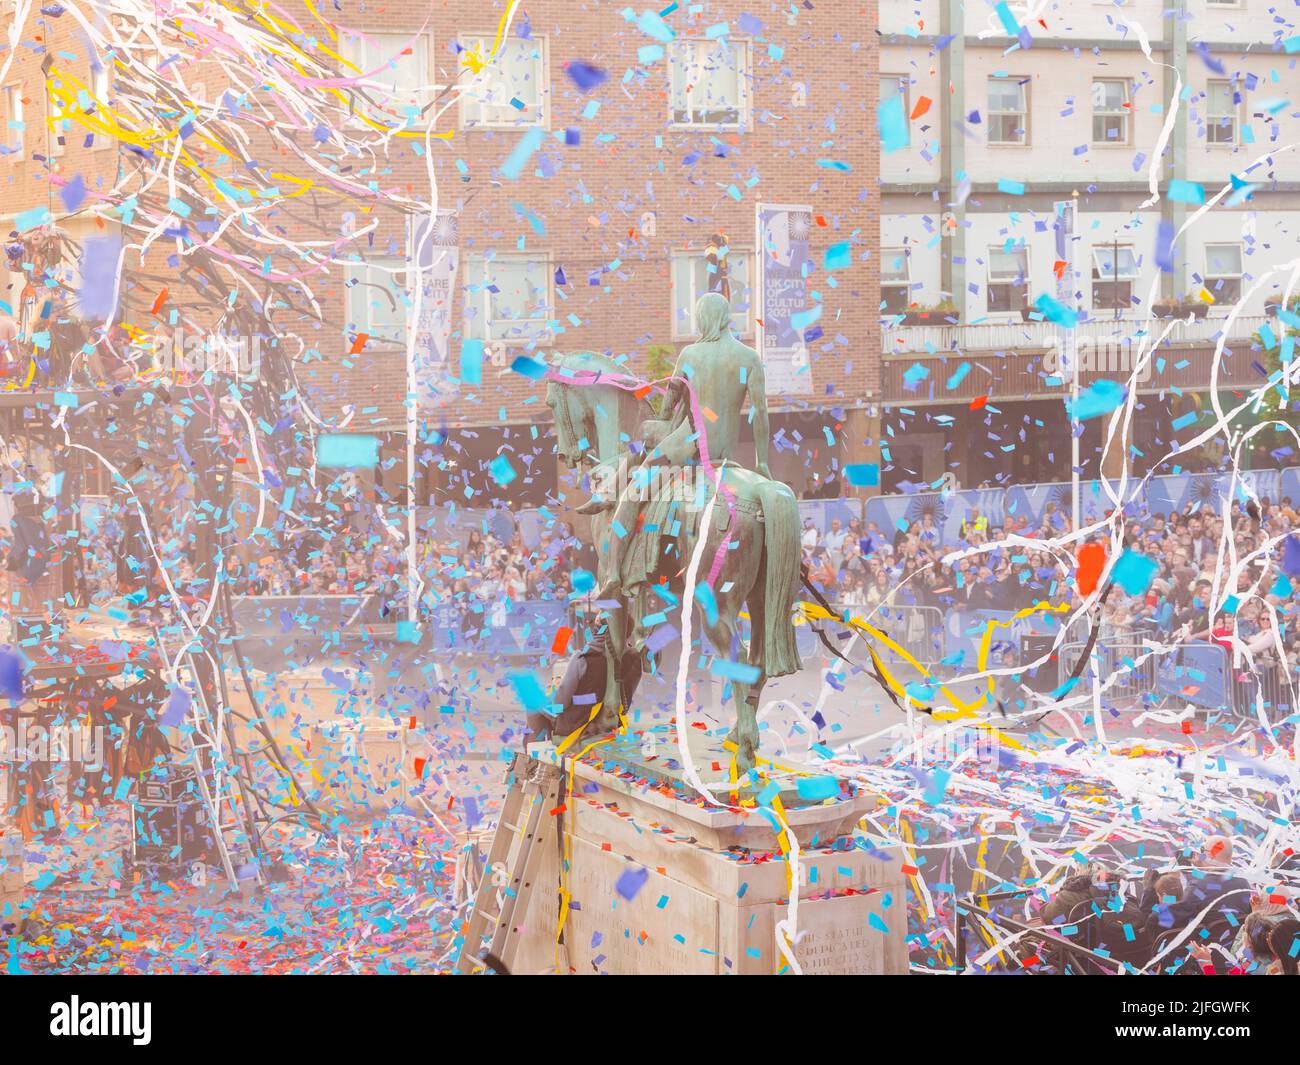 The finale to an outdoor performance in Coventry City Centre. The Awakening by Gratte Ciel included colourful confetti and streamers being fired. Stock Photo